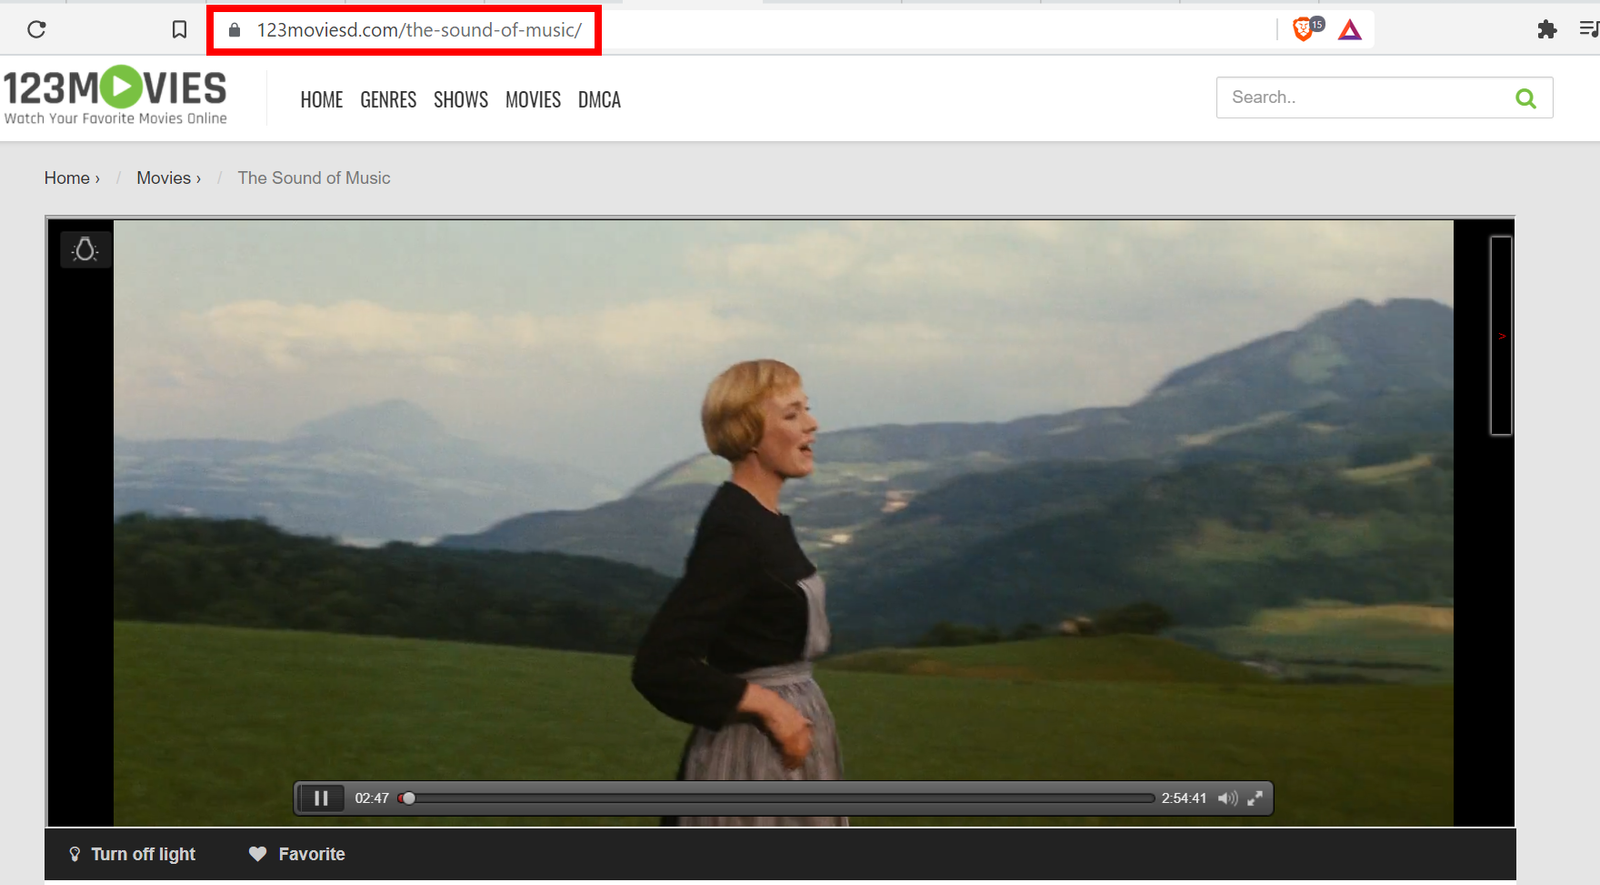 download the sound of music movie, movie search